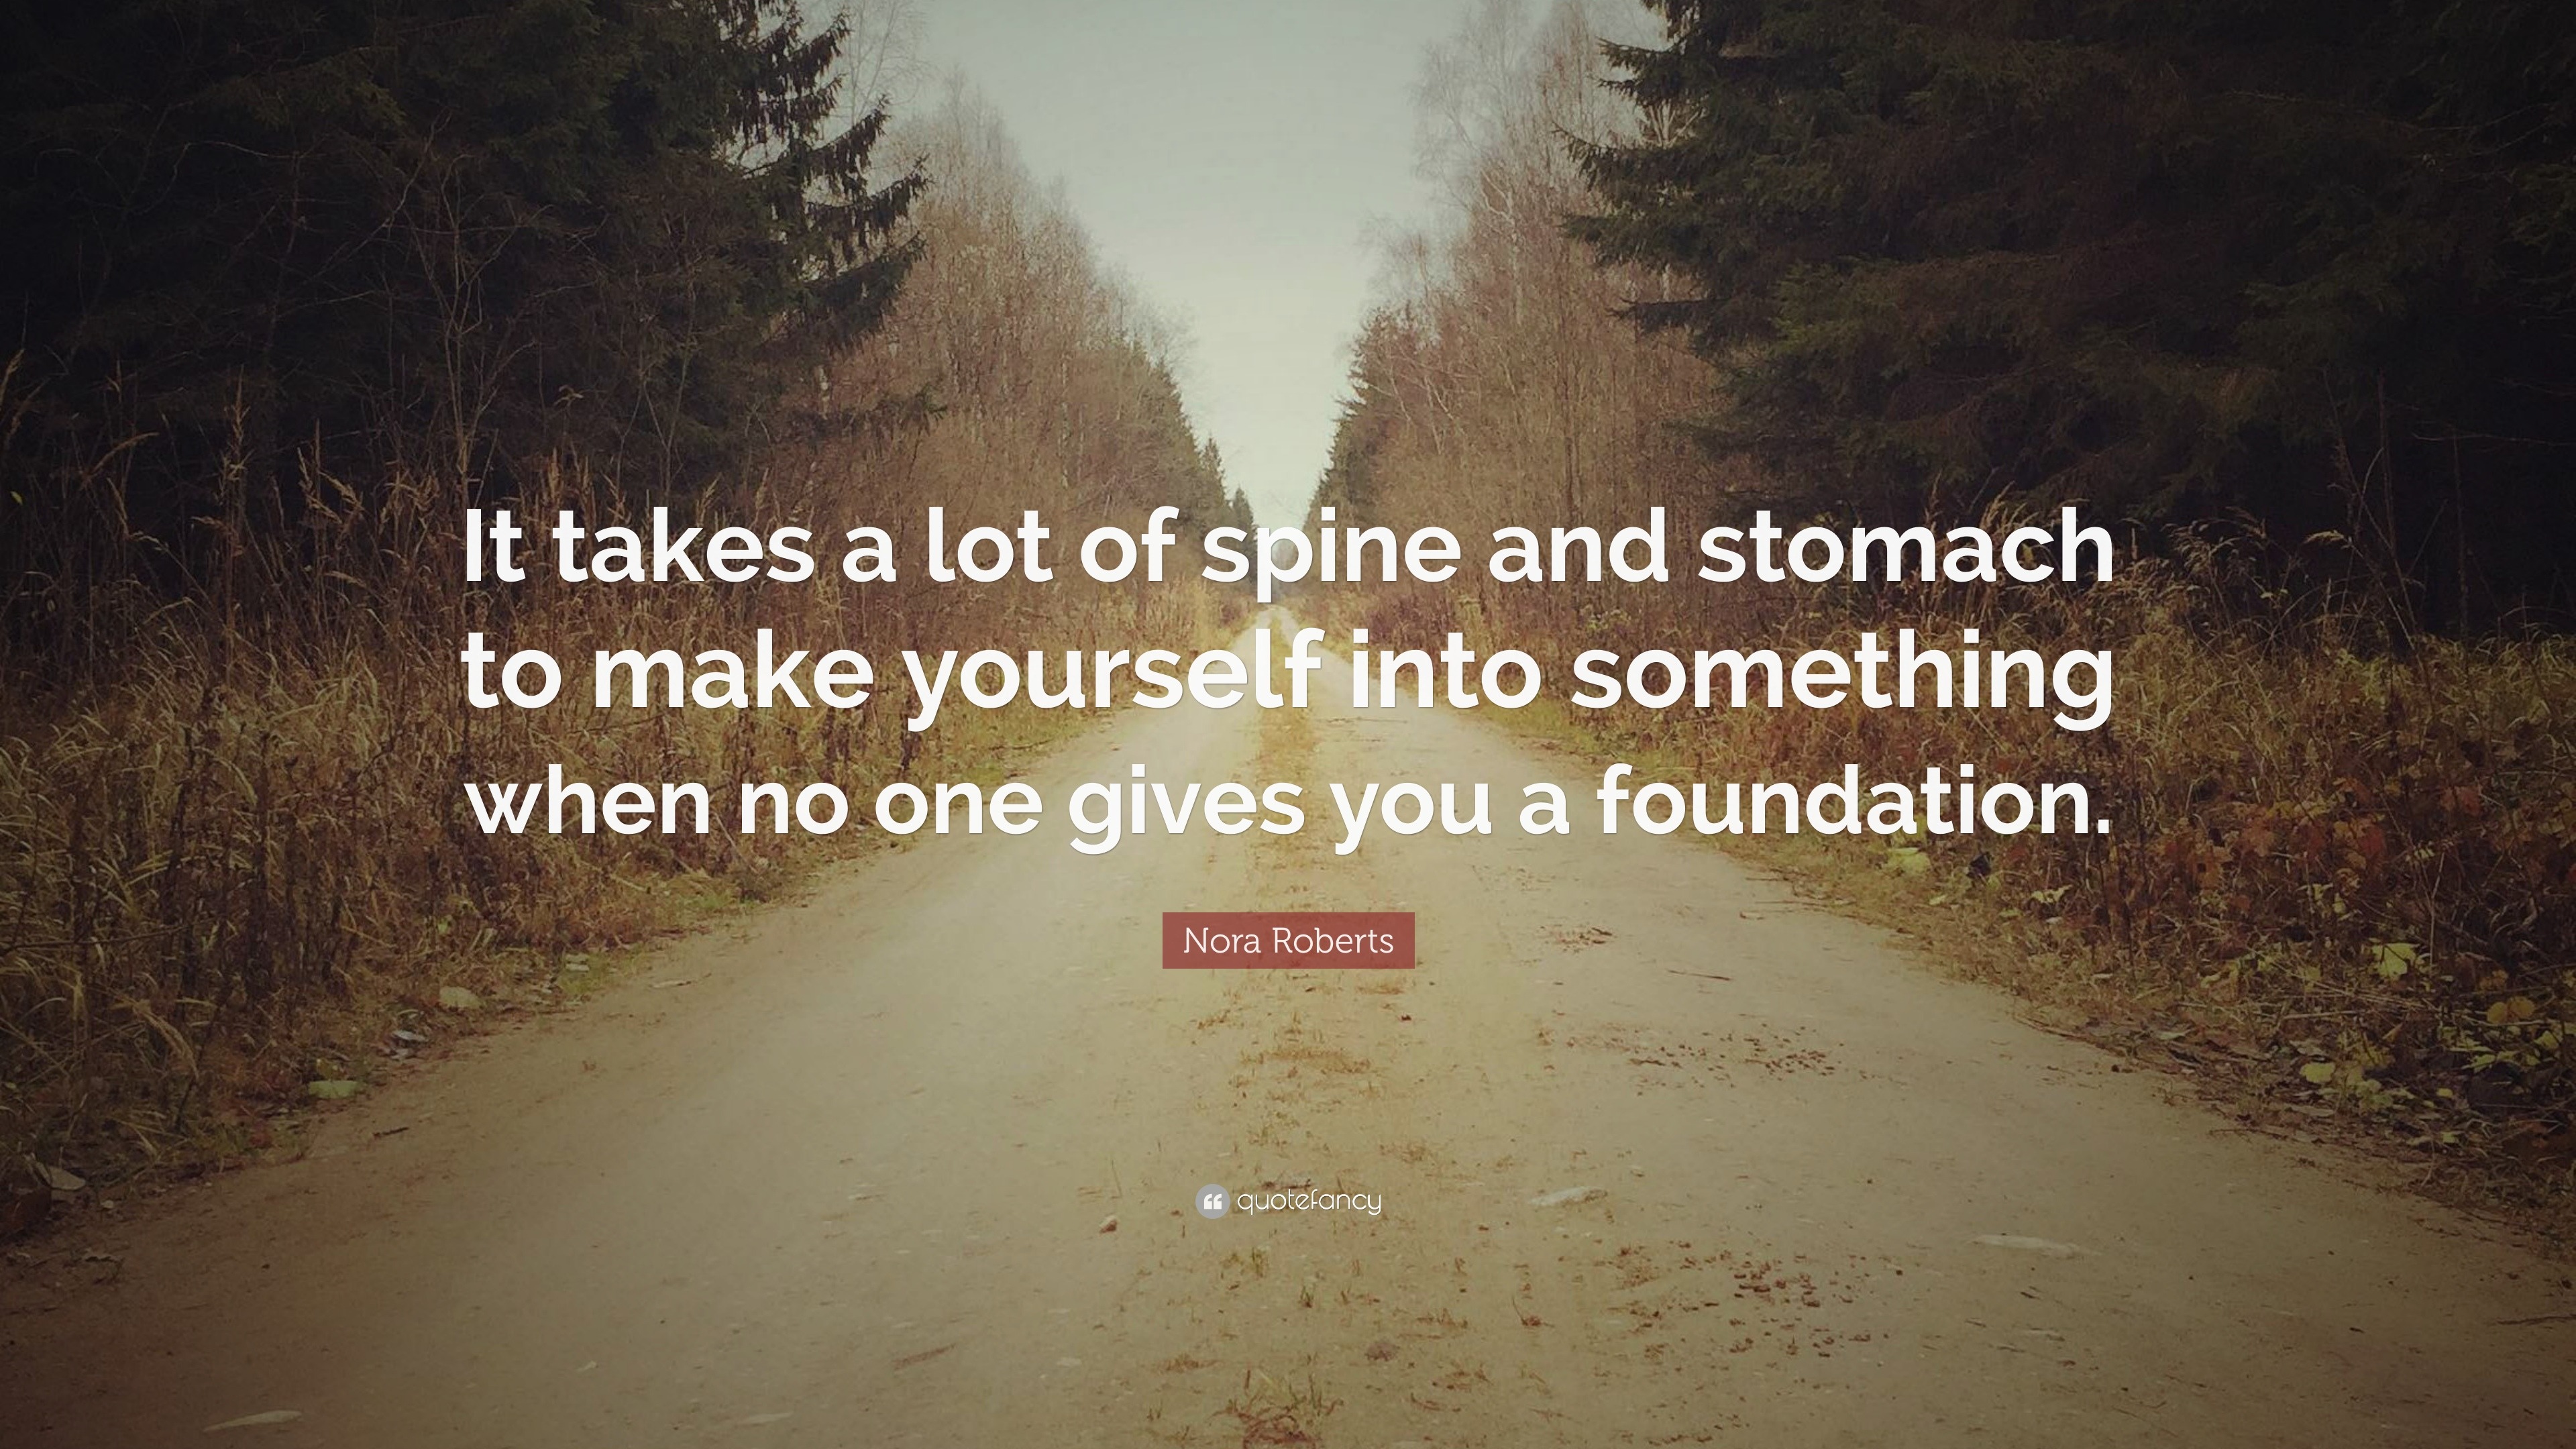 Nora Roberts Quote: “It takes a lot of spine and stomach to make ...